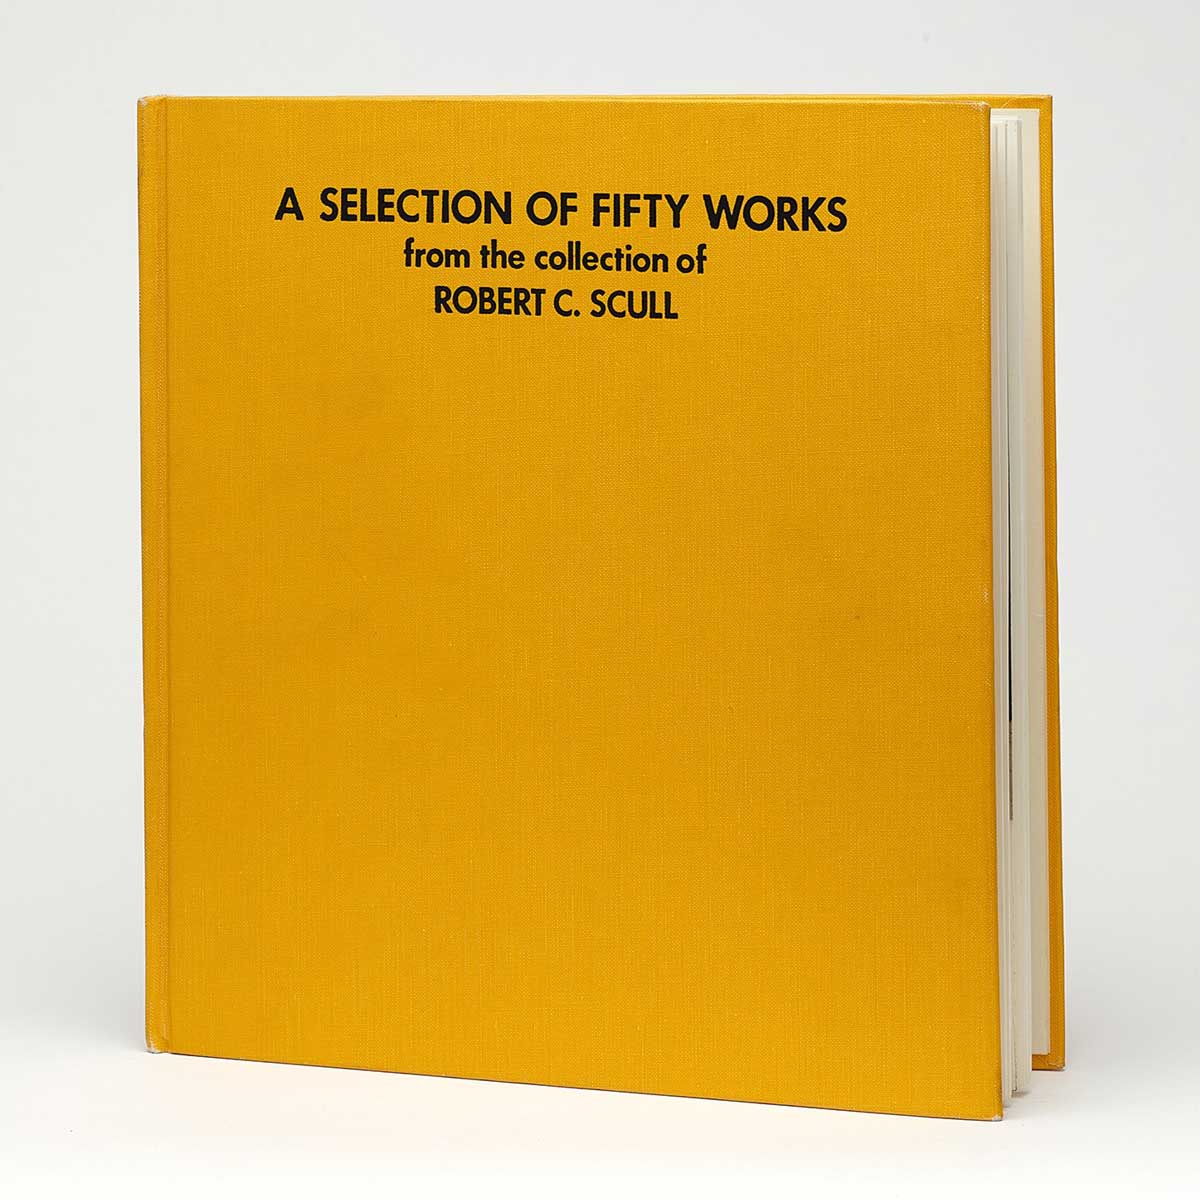 Bright yellow book cover with the title "A Selection of Fifty Works from the collection of Robert C. Scull"